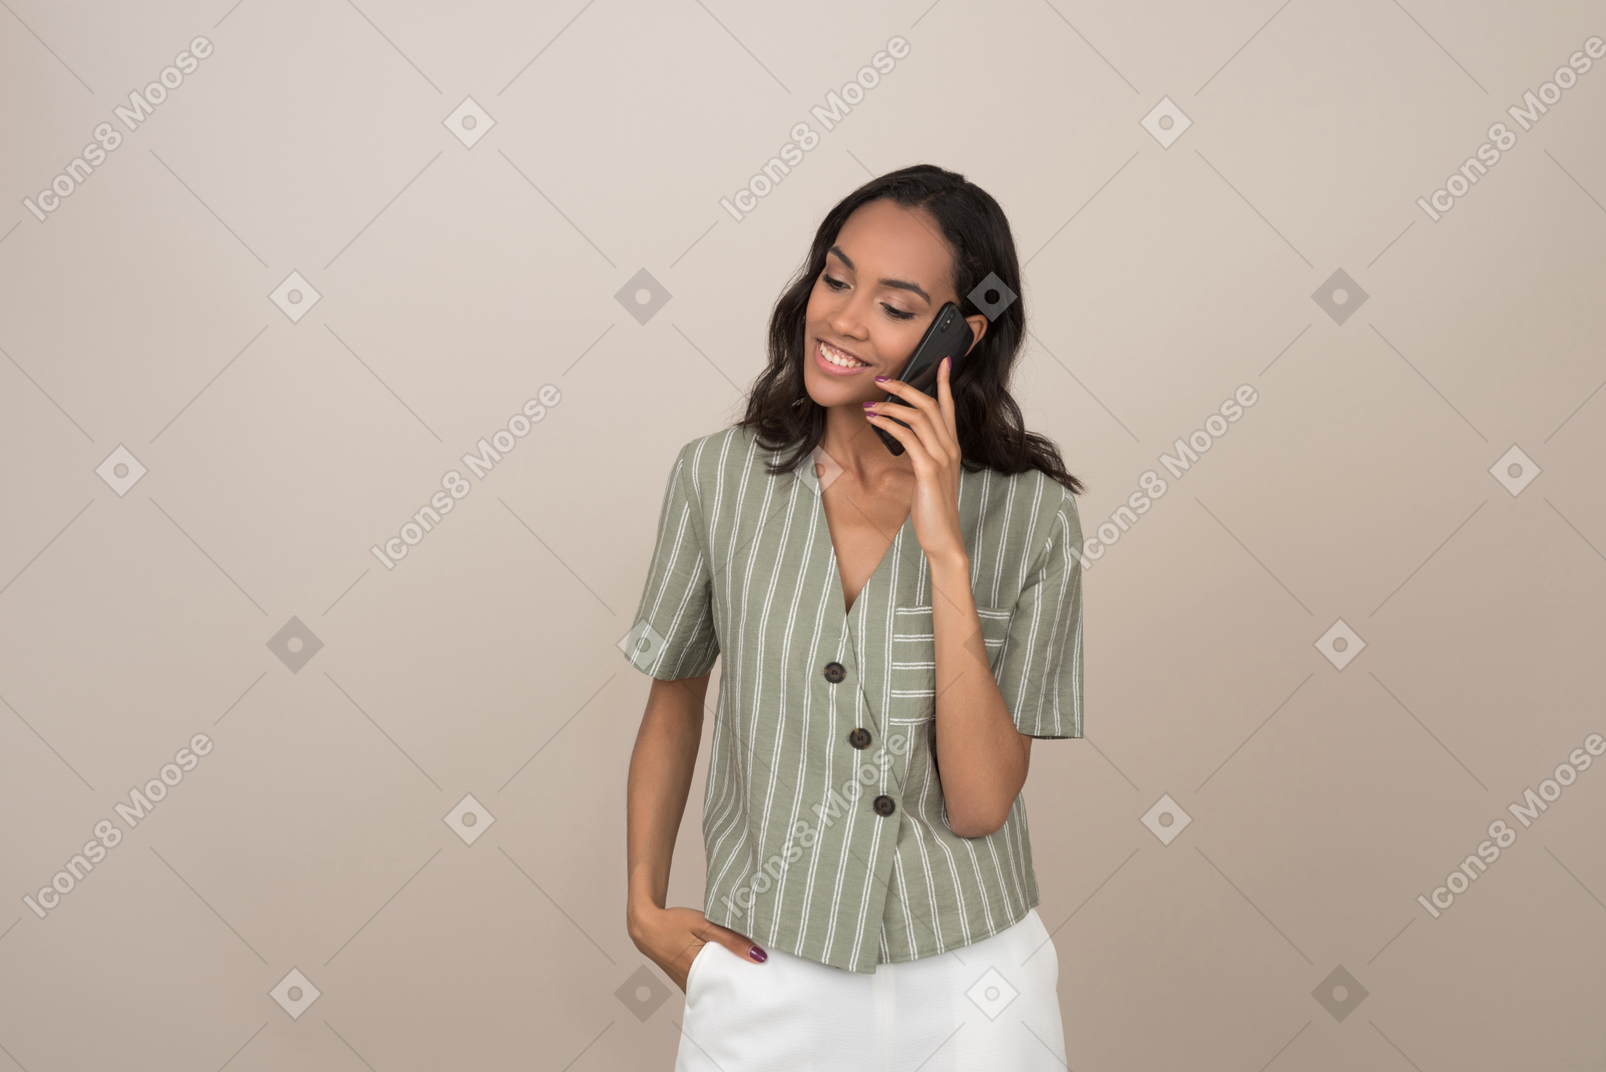 Pretty young girl talking on the phone and dreaming about something